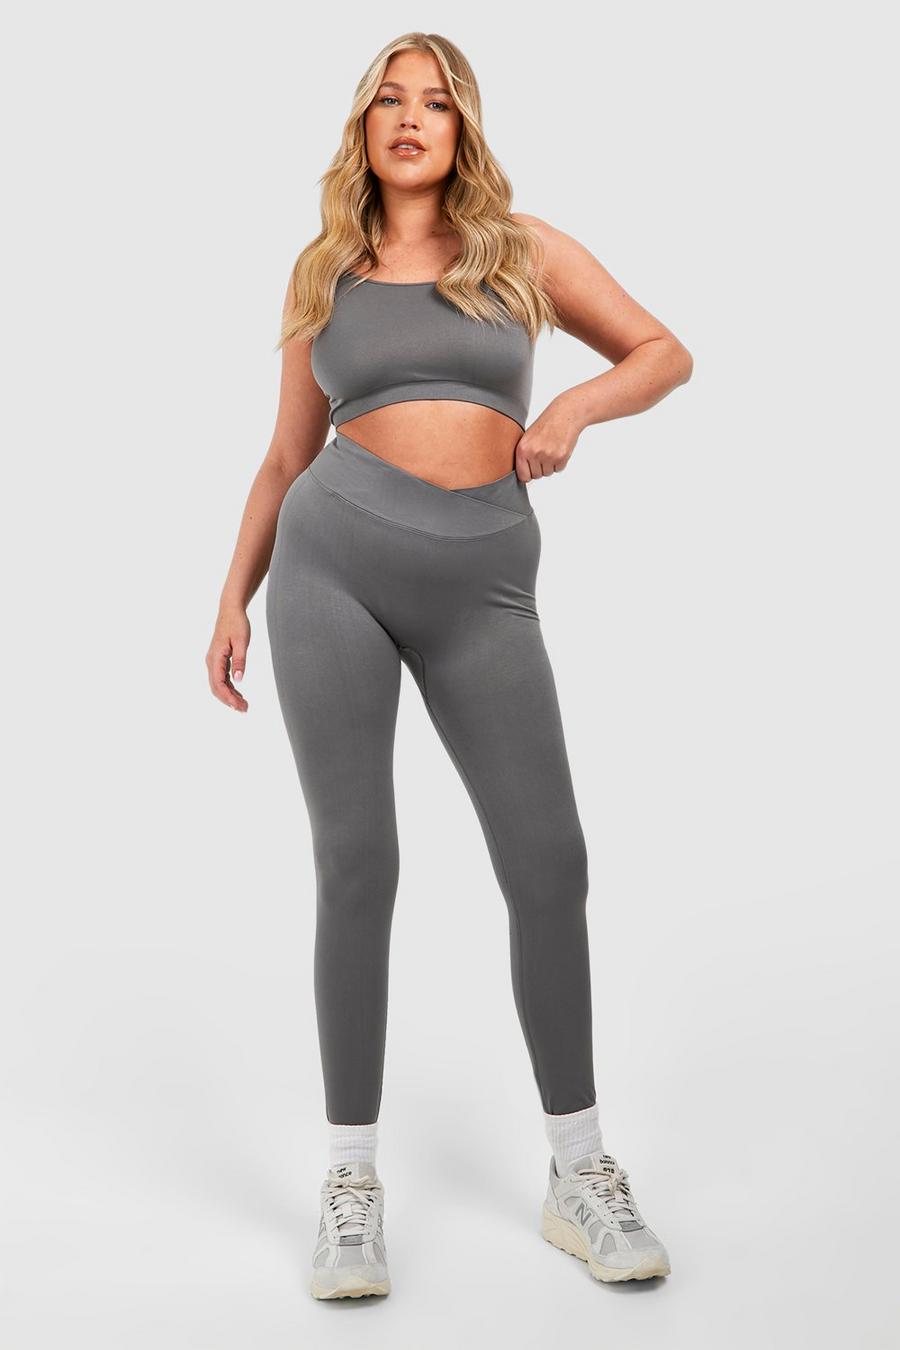 Grande taille - Legging sans coutures, Charcoal